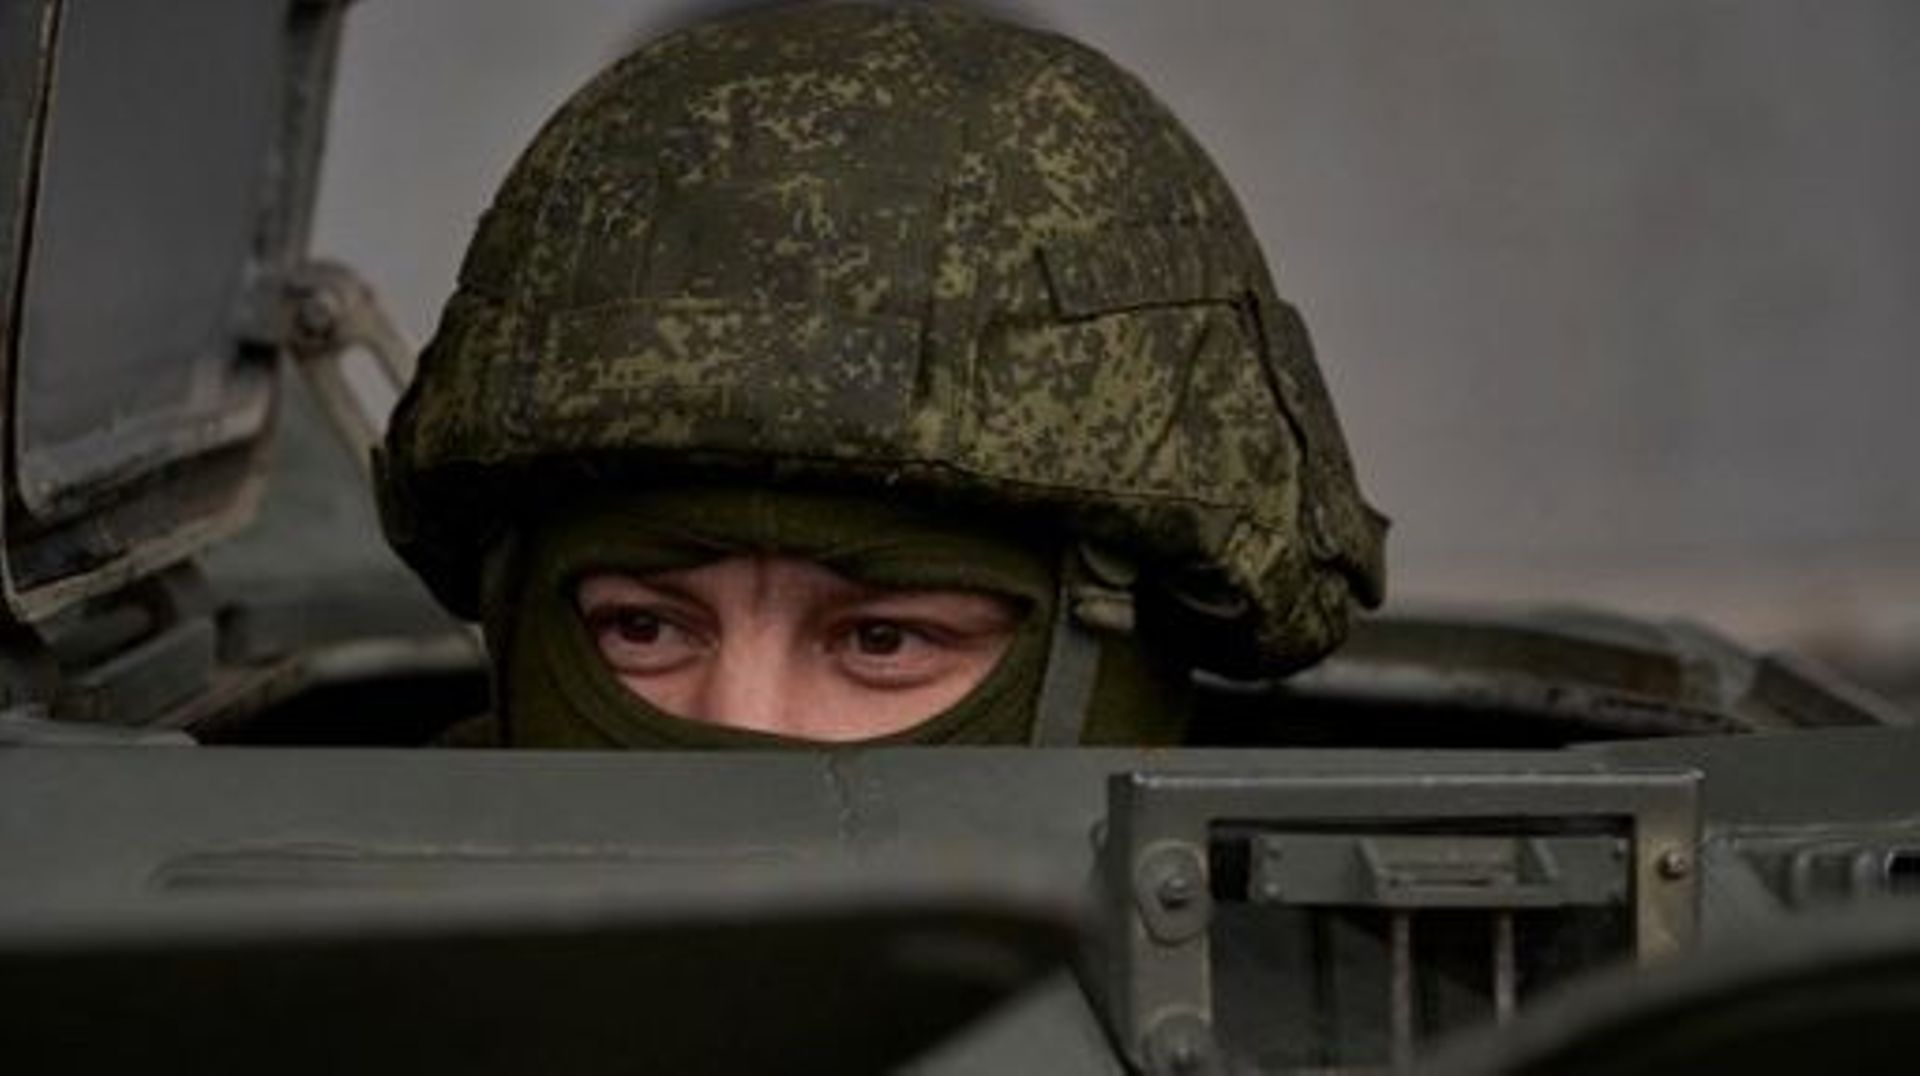 A Russian serviceman keeps watch from the hatch of a military vehicle as the delegation of the International Atomic Energy Agency (IAEA), including its head Rafael Grossi, visits the Russian-controlled Zaporizhzhia nuclear power plant in southern Ukraine.